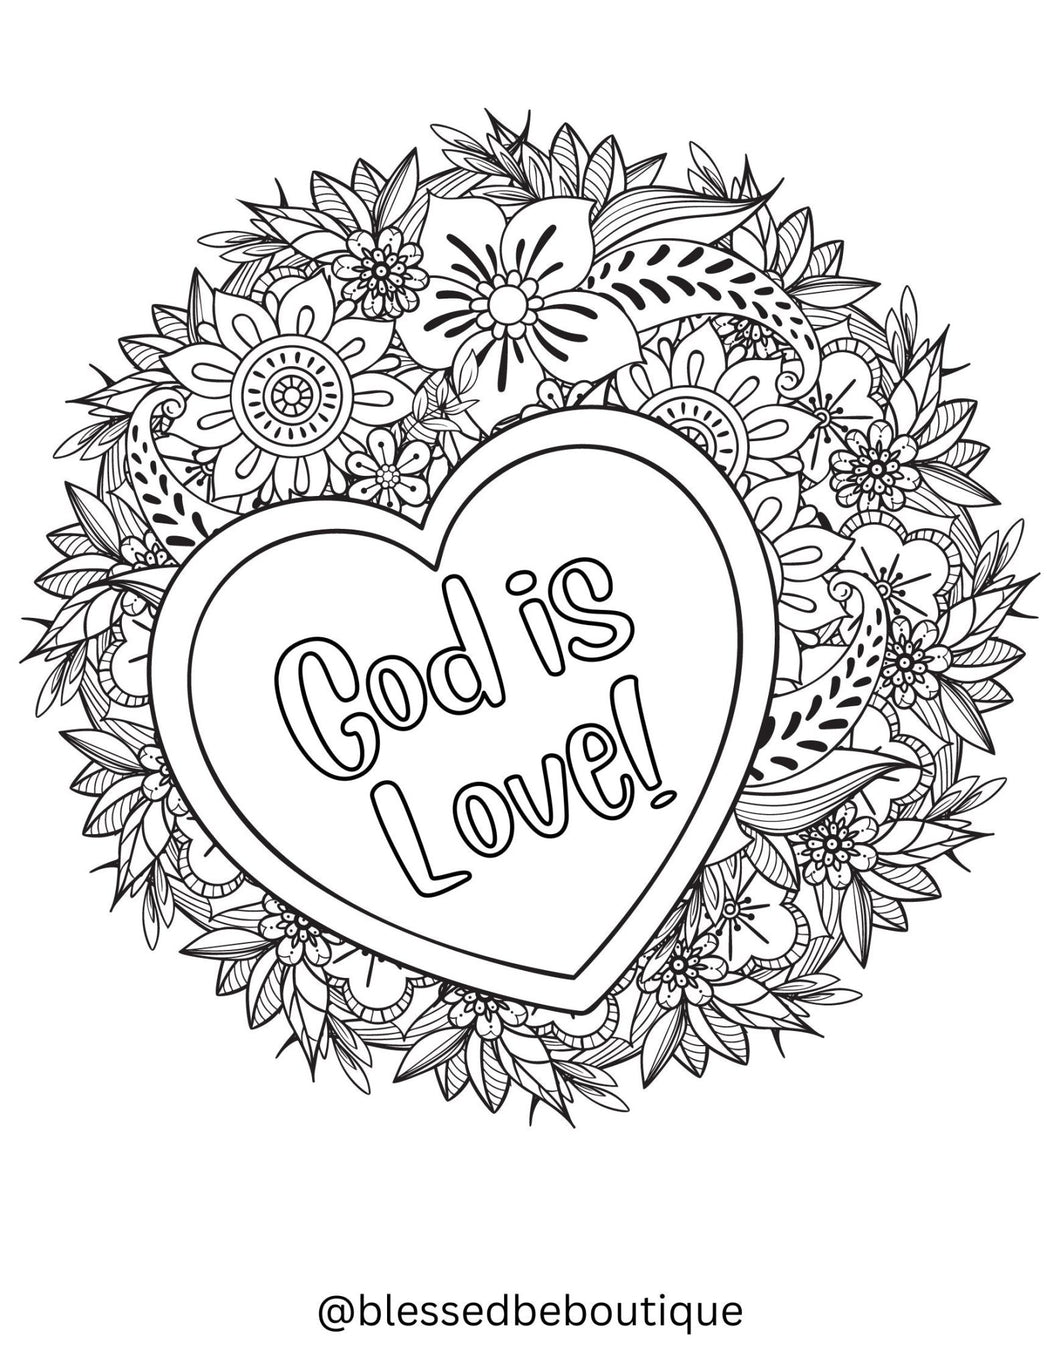 God is Love - Blessed Be Boutique